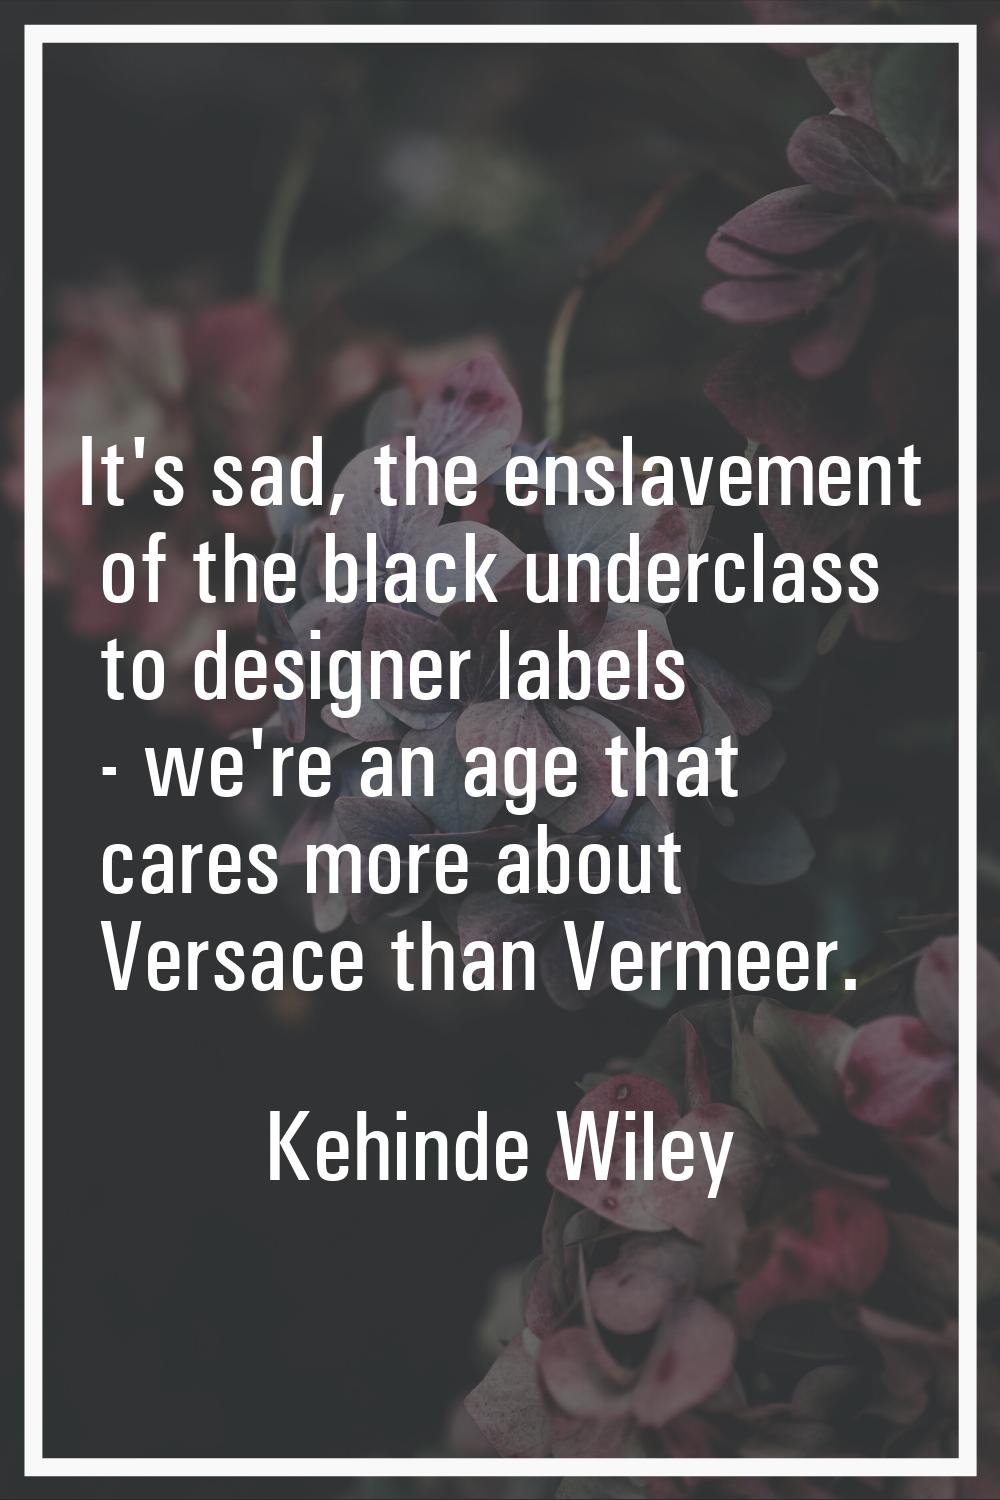 It's sad, the enslavement of the black underclass to designer labels - we're an age that cares more